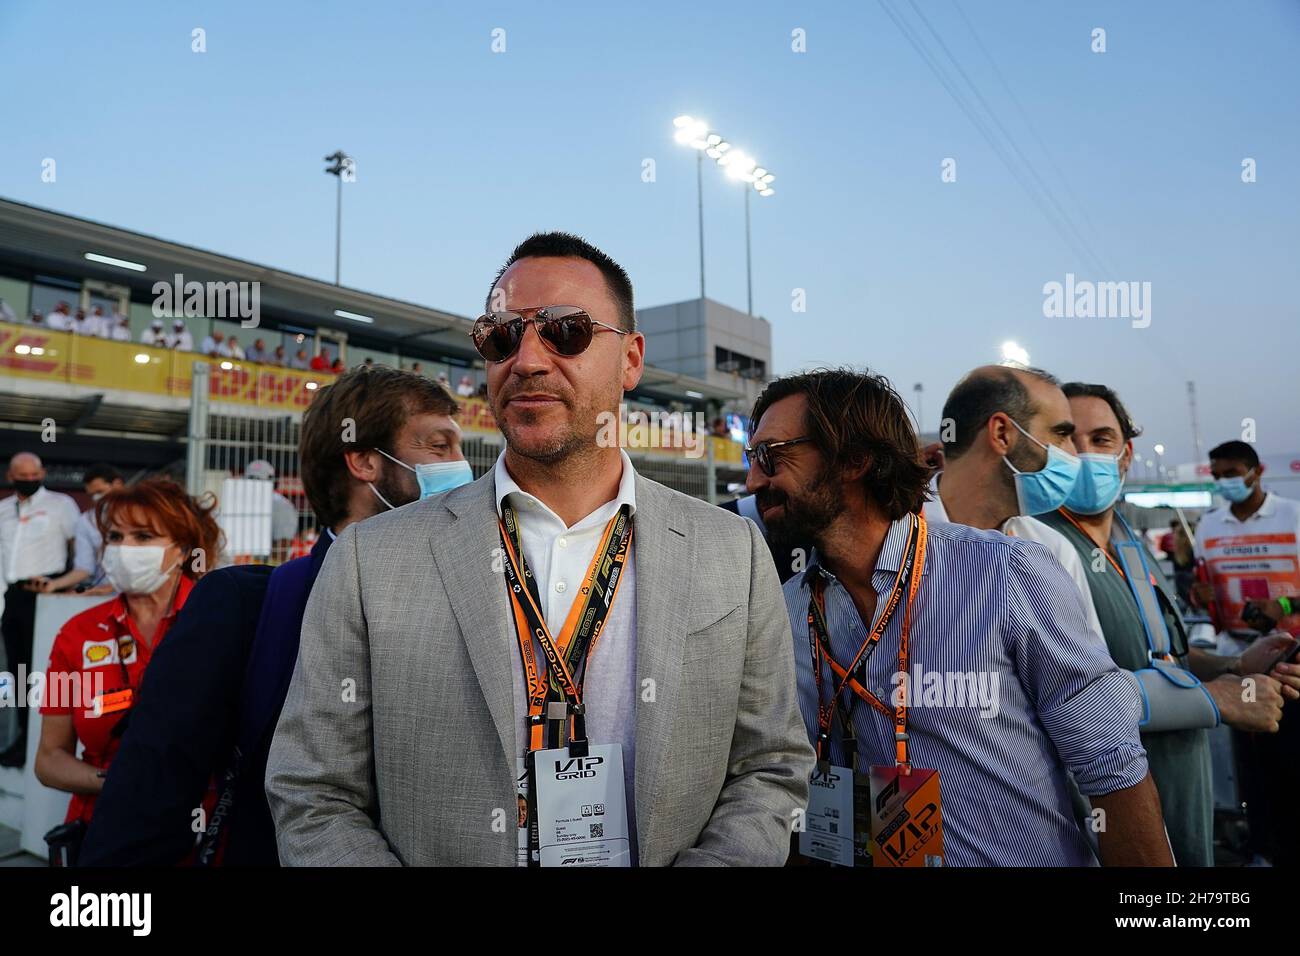 Lusail, Qatar. 21st Nov, 2021. Motorsport, Formula 1 World Championship,  Qatar Grand Prix: John Terry and Andrea Pirlo (r) line up on the grid  before the start of the race. Credit: Hasan